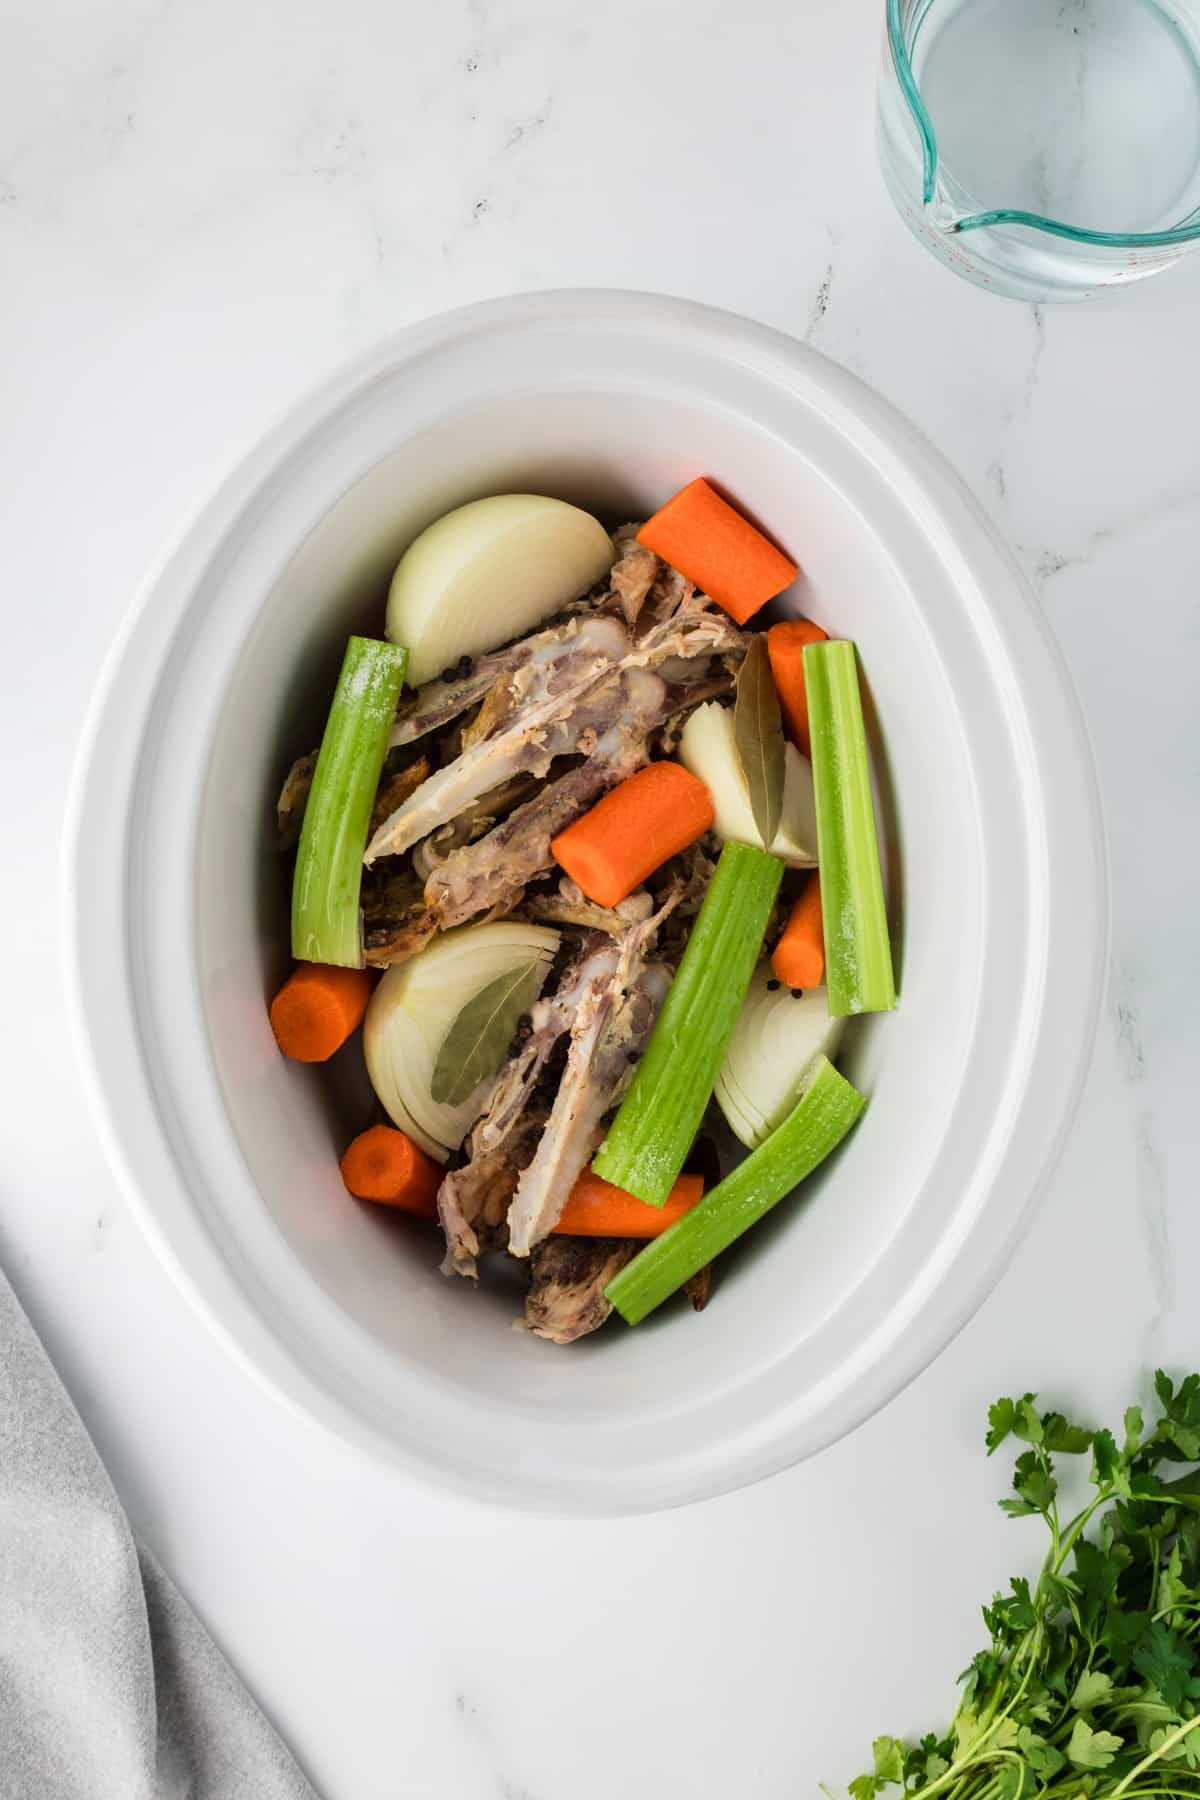 A slow cooker filled with bones and vegetables.